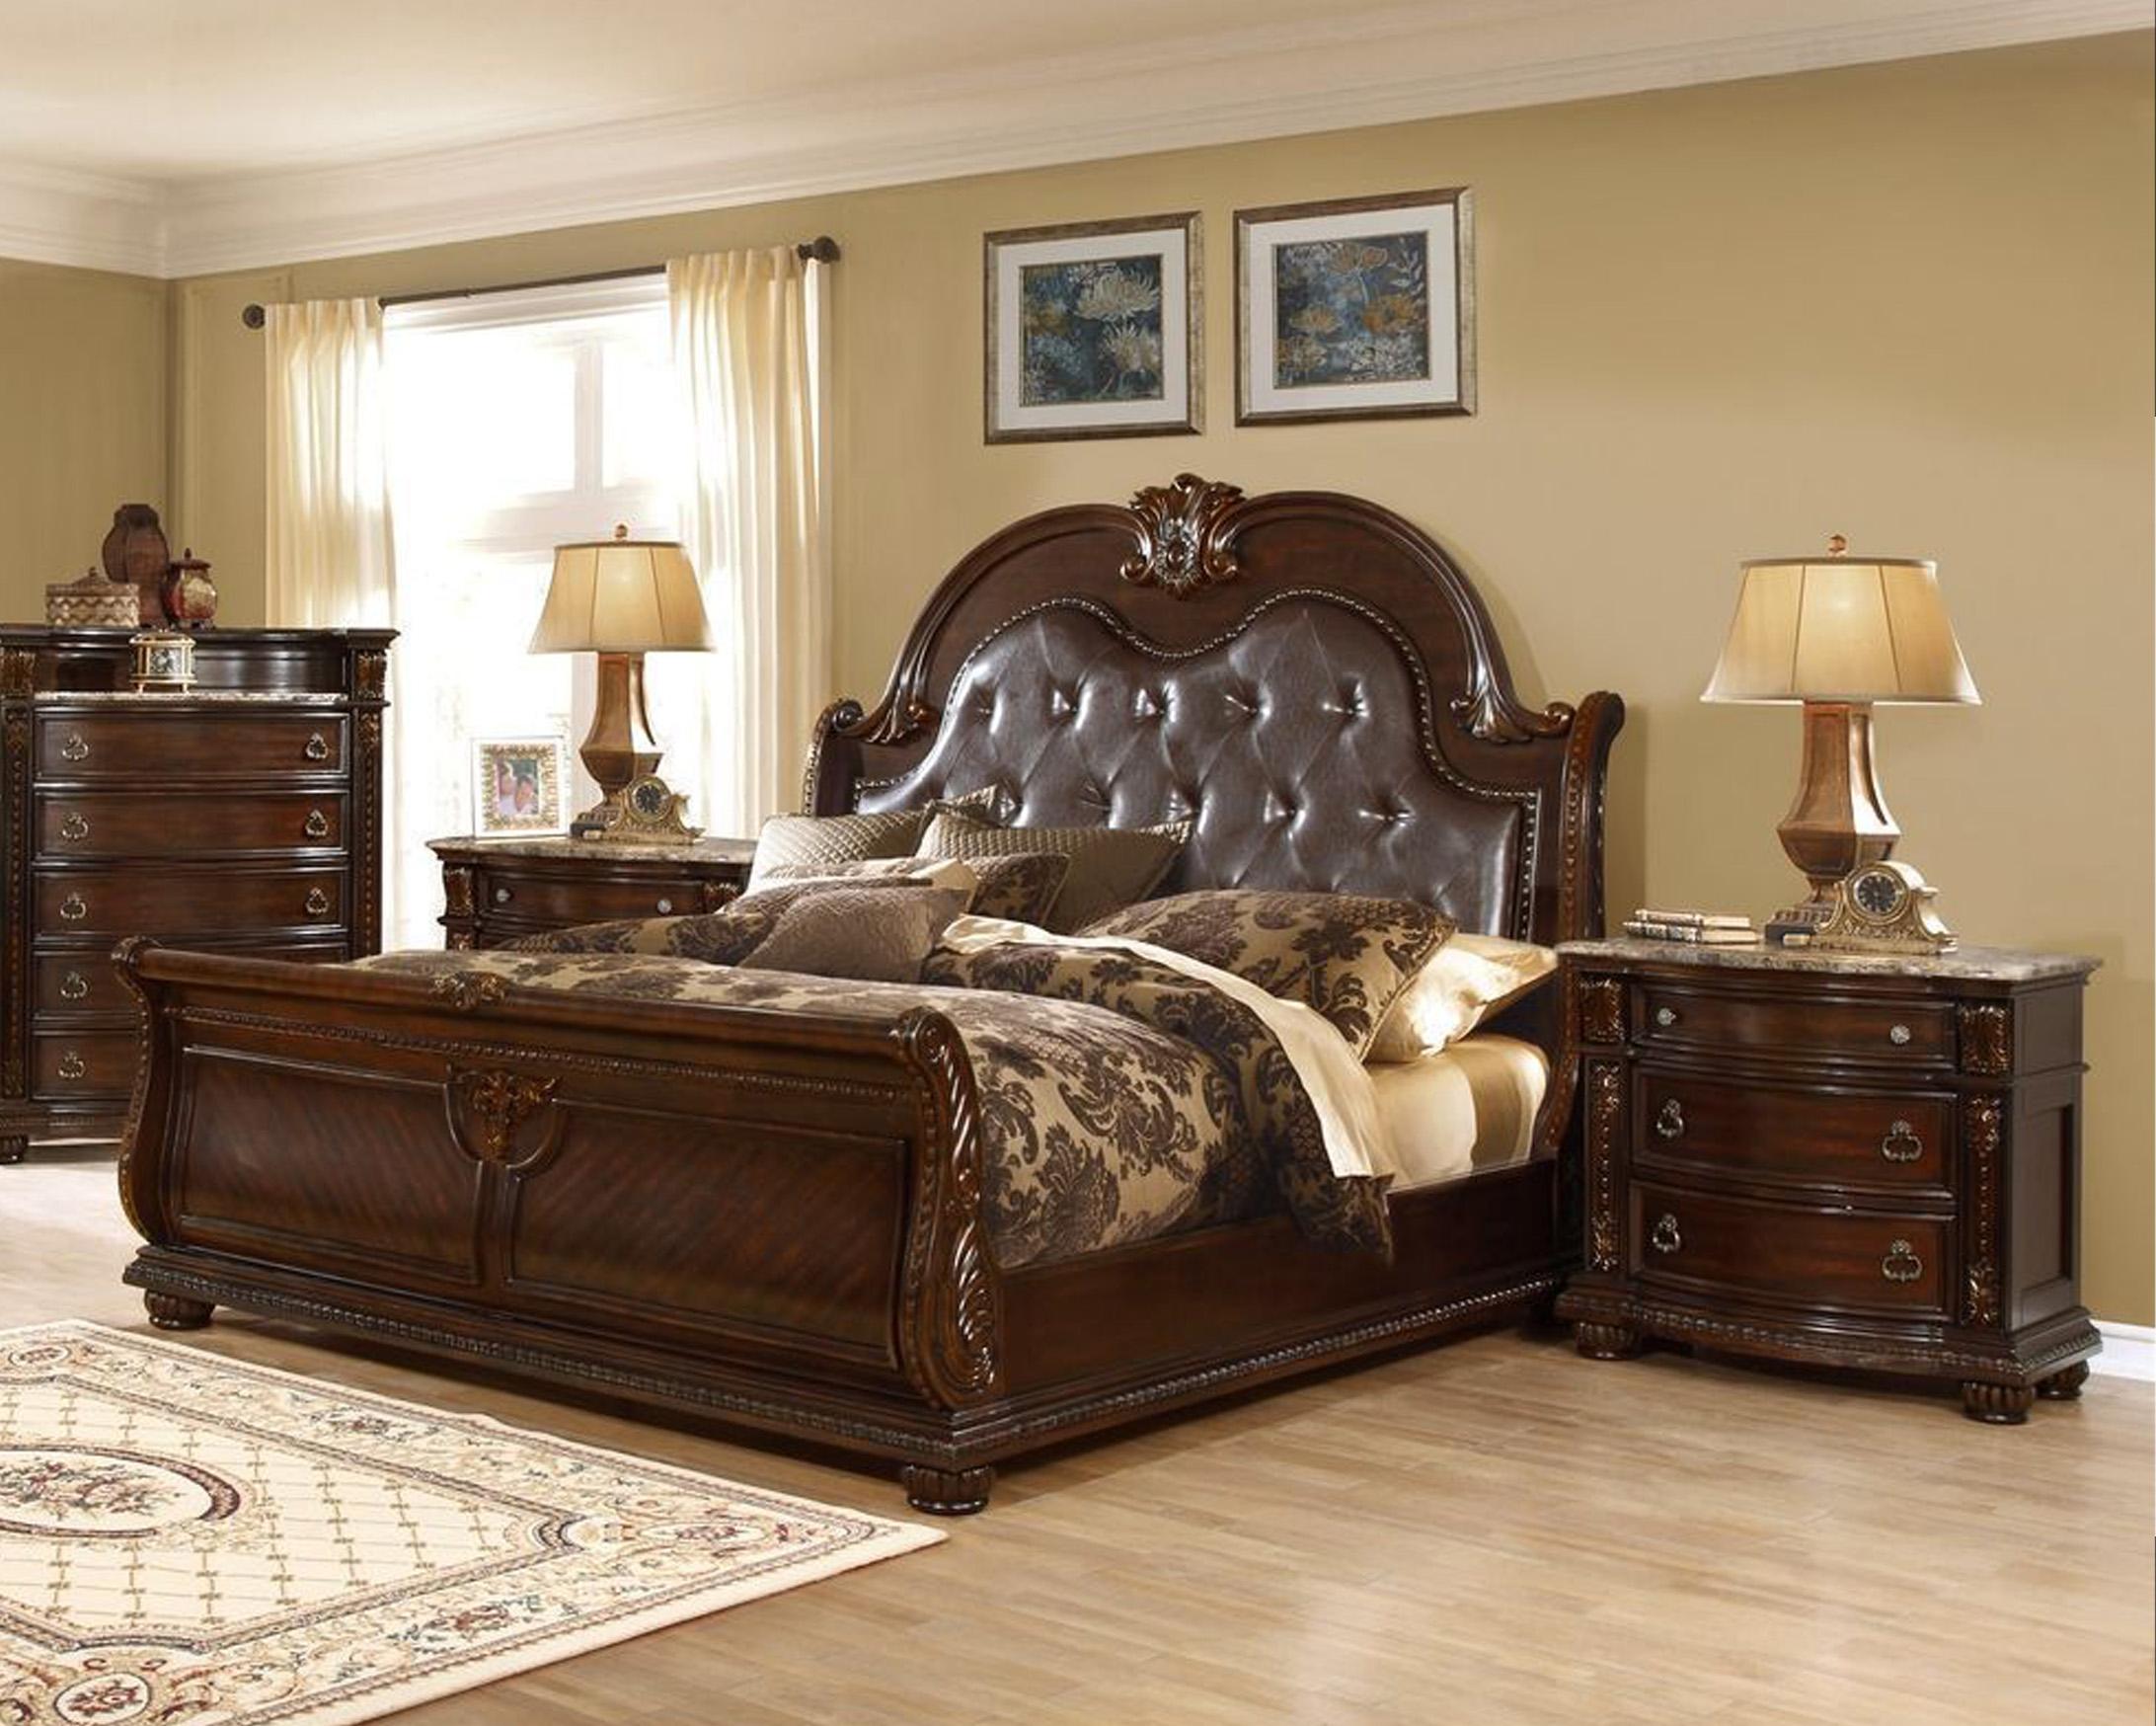 Classic, Traditional Sleigh Bedroom Set B9505 B9505-Q-2N-3PC in Dark Cherry Bonded Leather